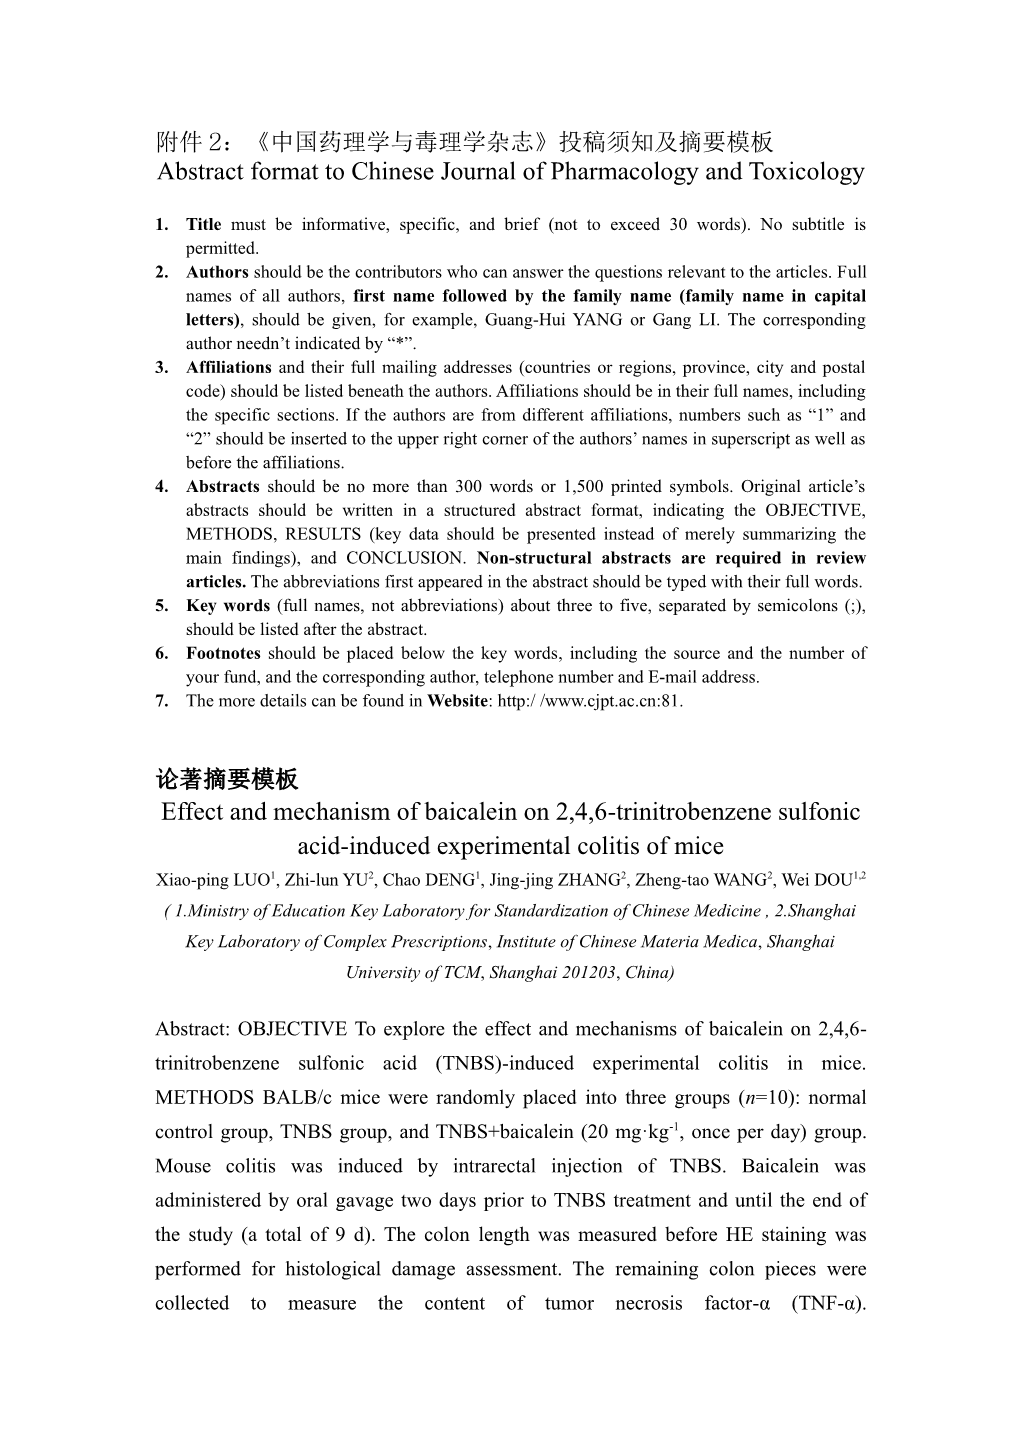 Abstract Format to Chinese Journal of Pharmacology and Toxicology